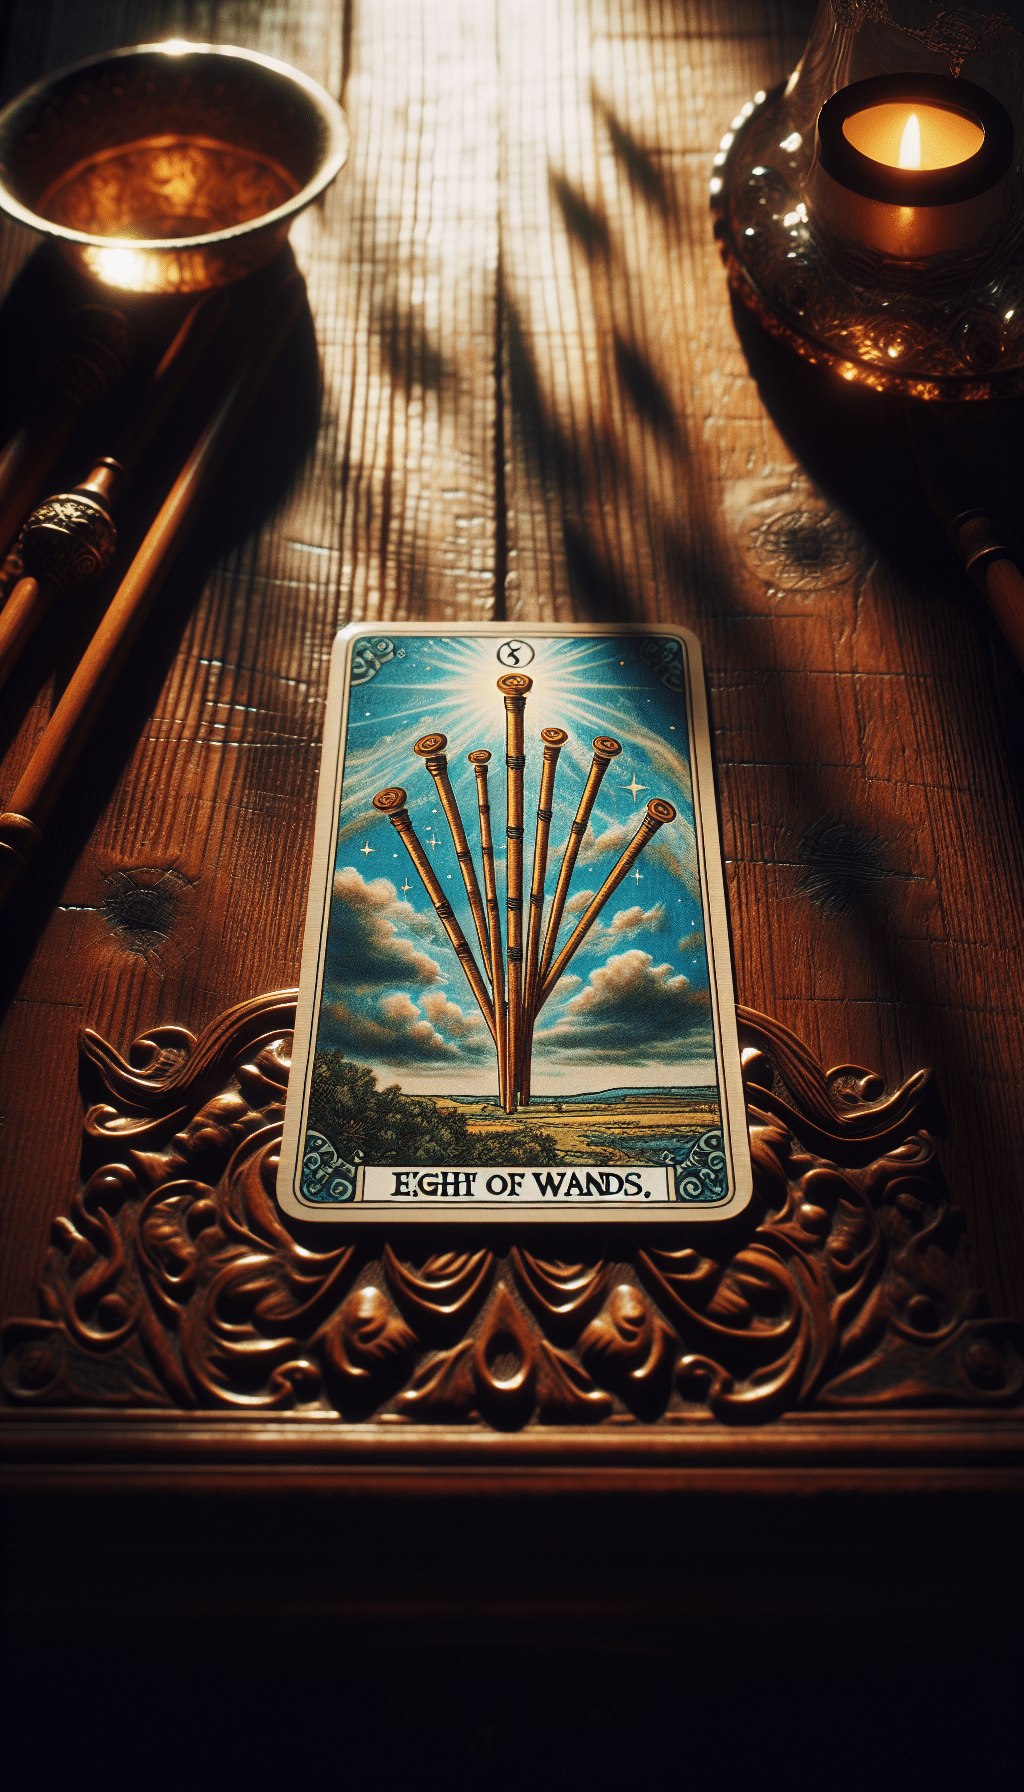 Eight of Wands: Swift and Direct Advice for Fast Progress